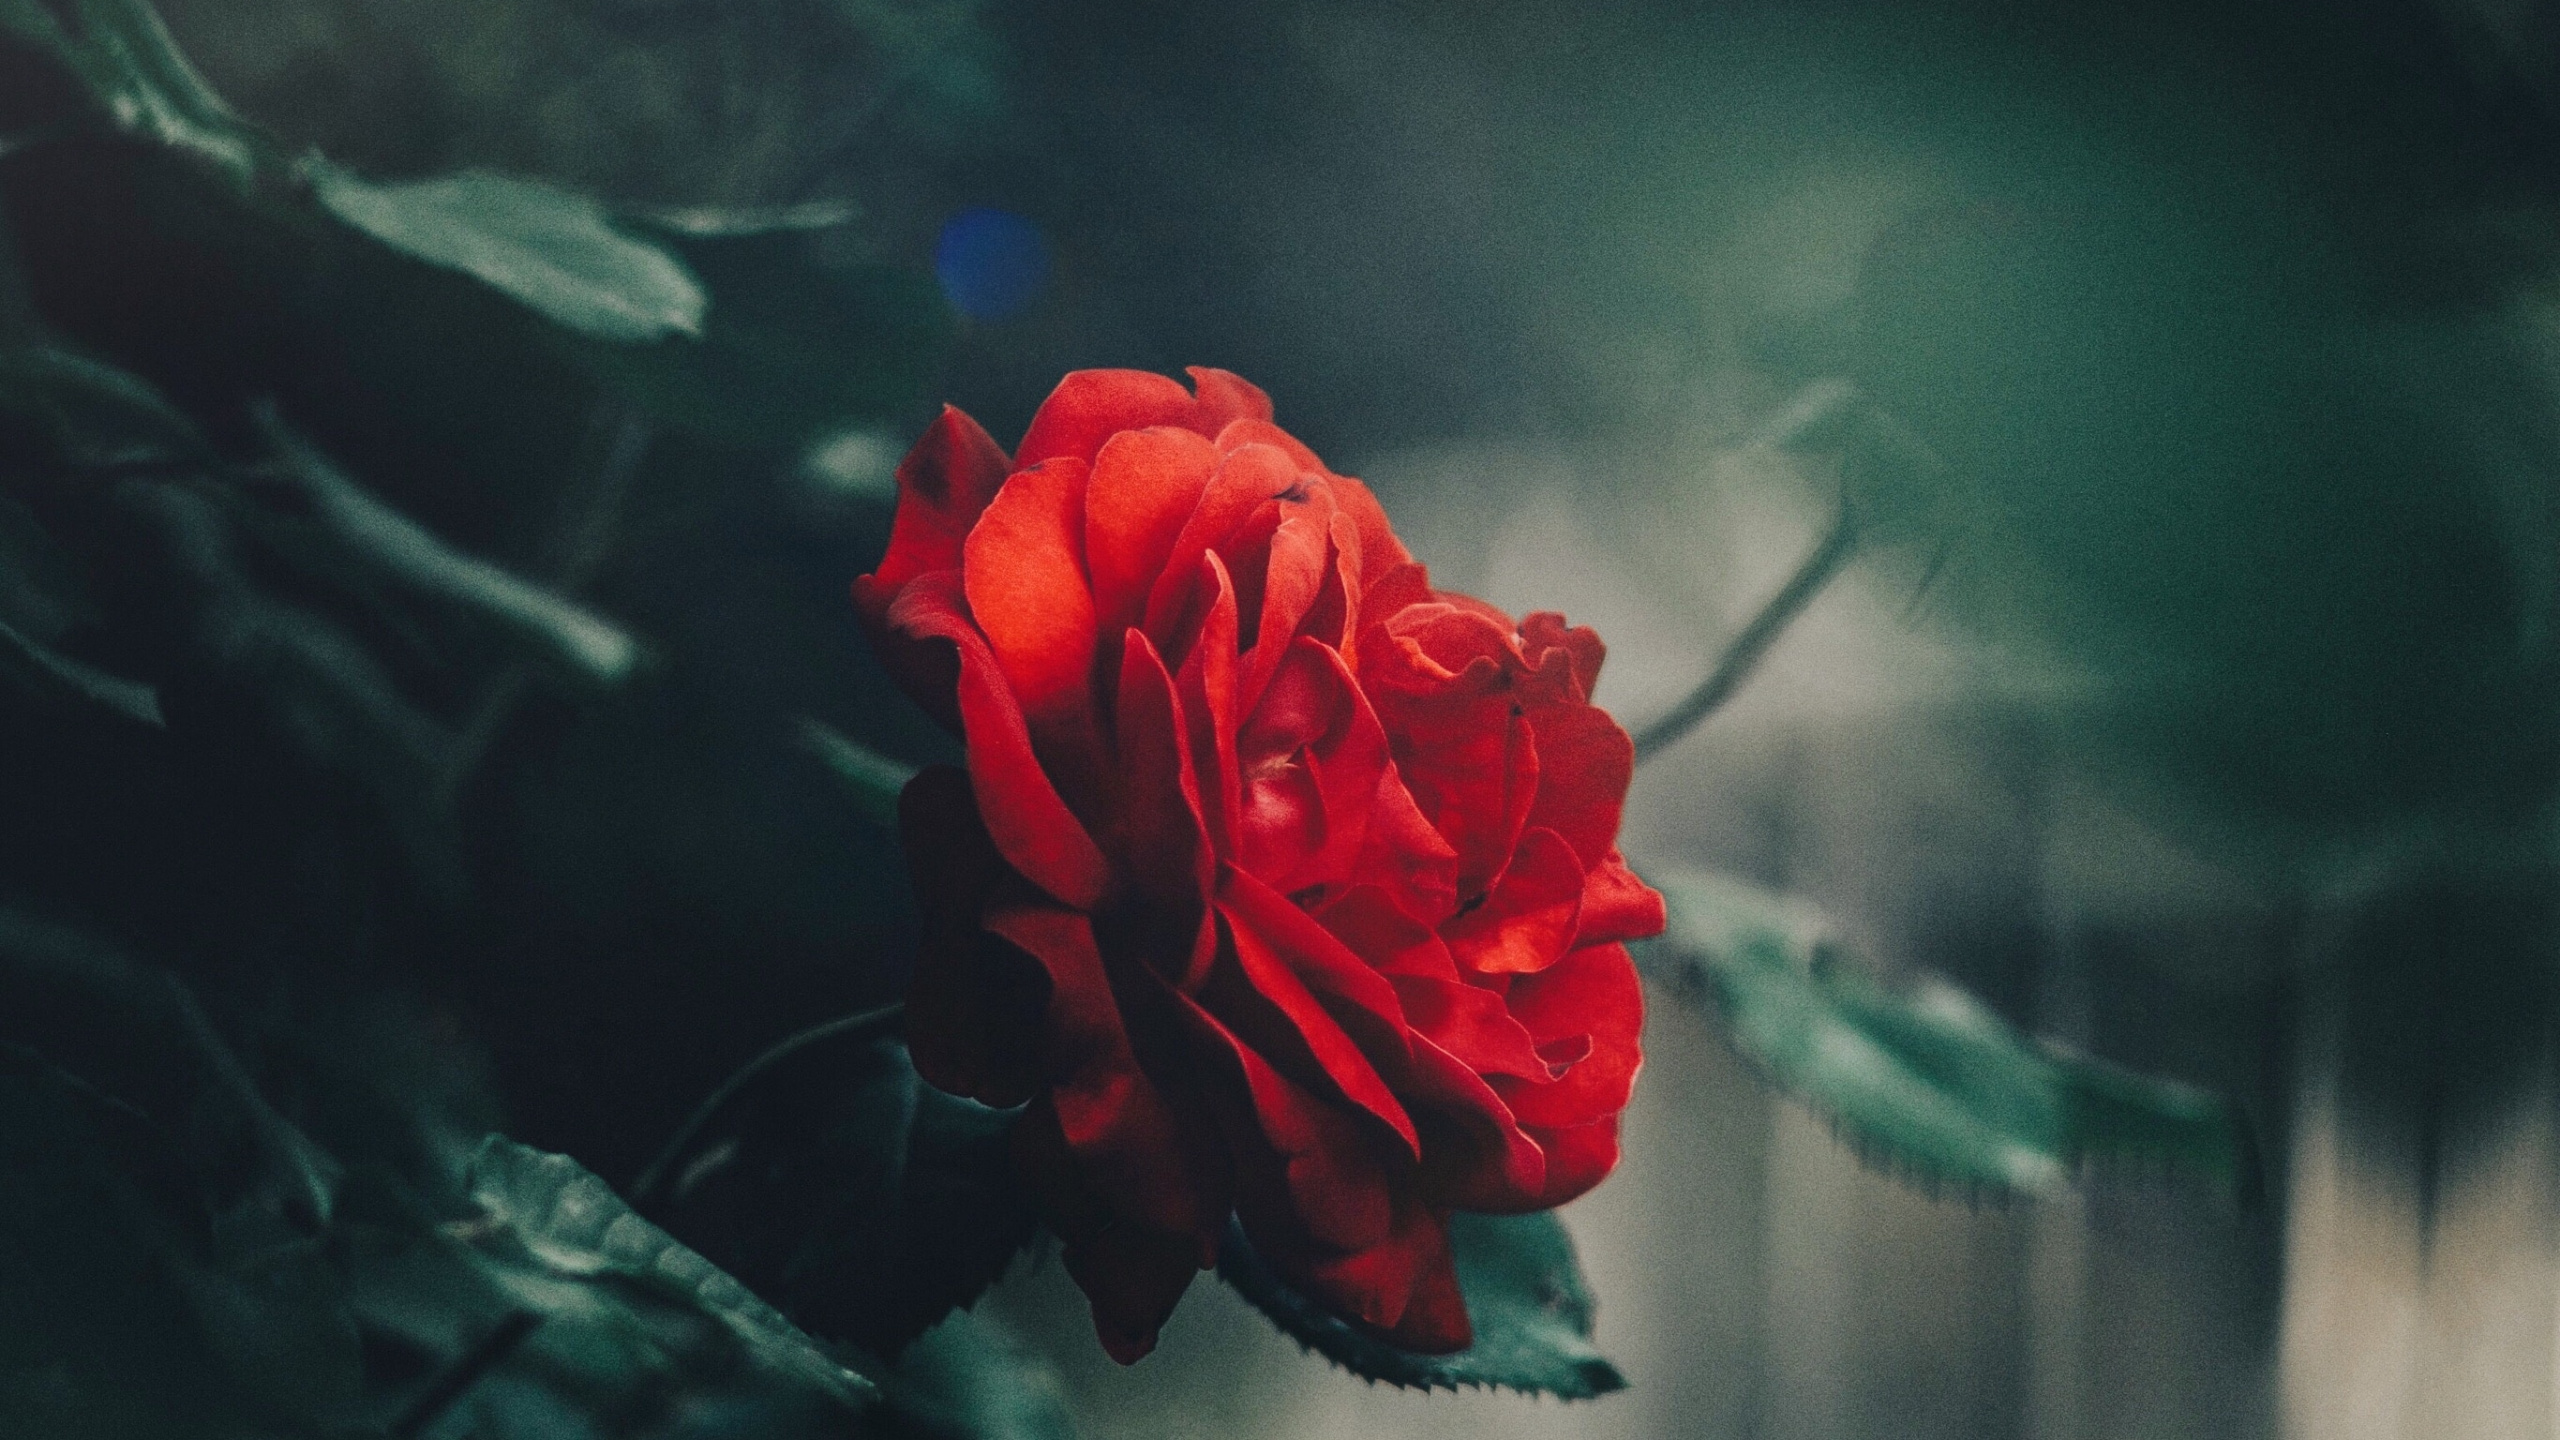 Red Rose in Bloom During Daytime. Wallpaper in 2560x1440 Resolution